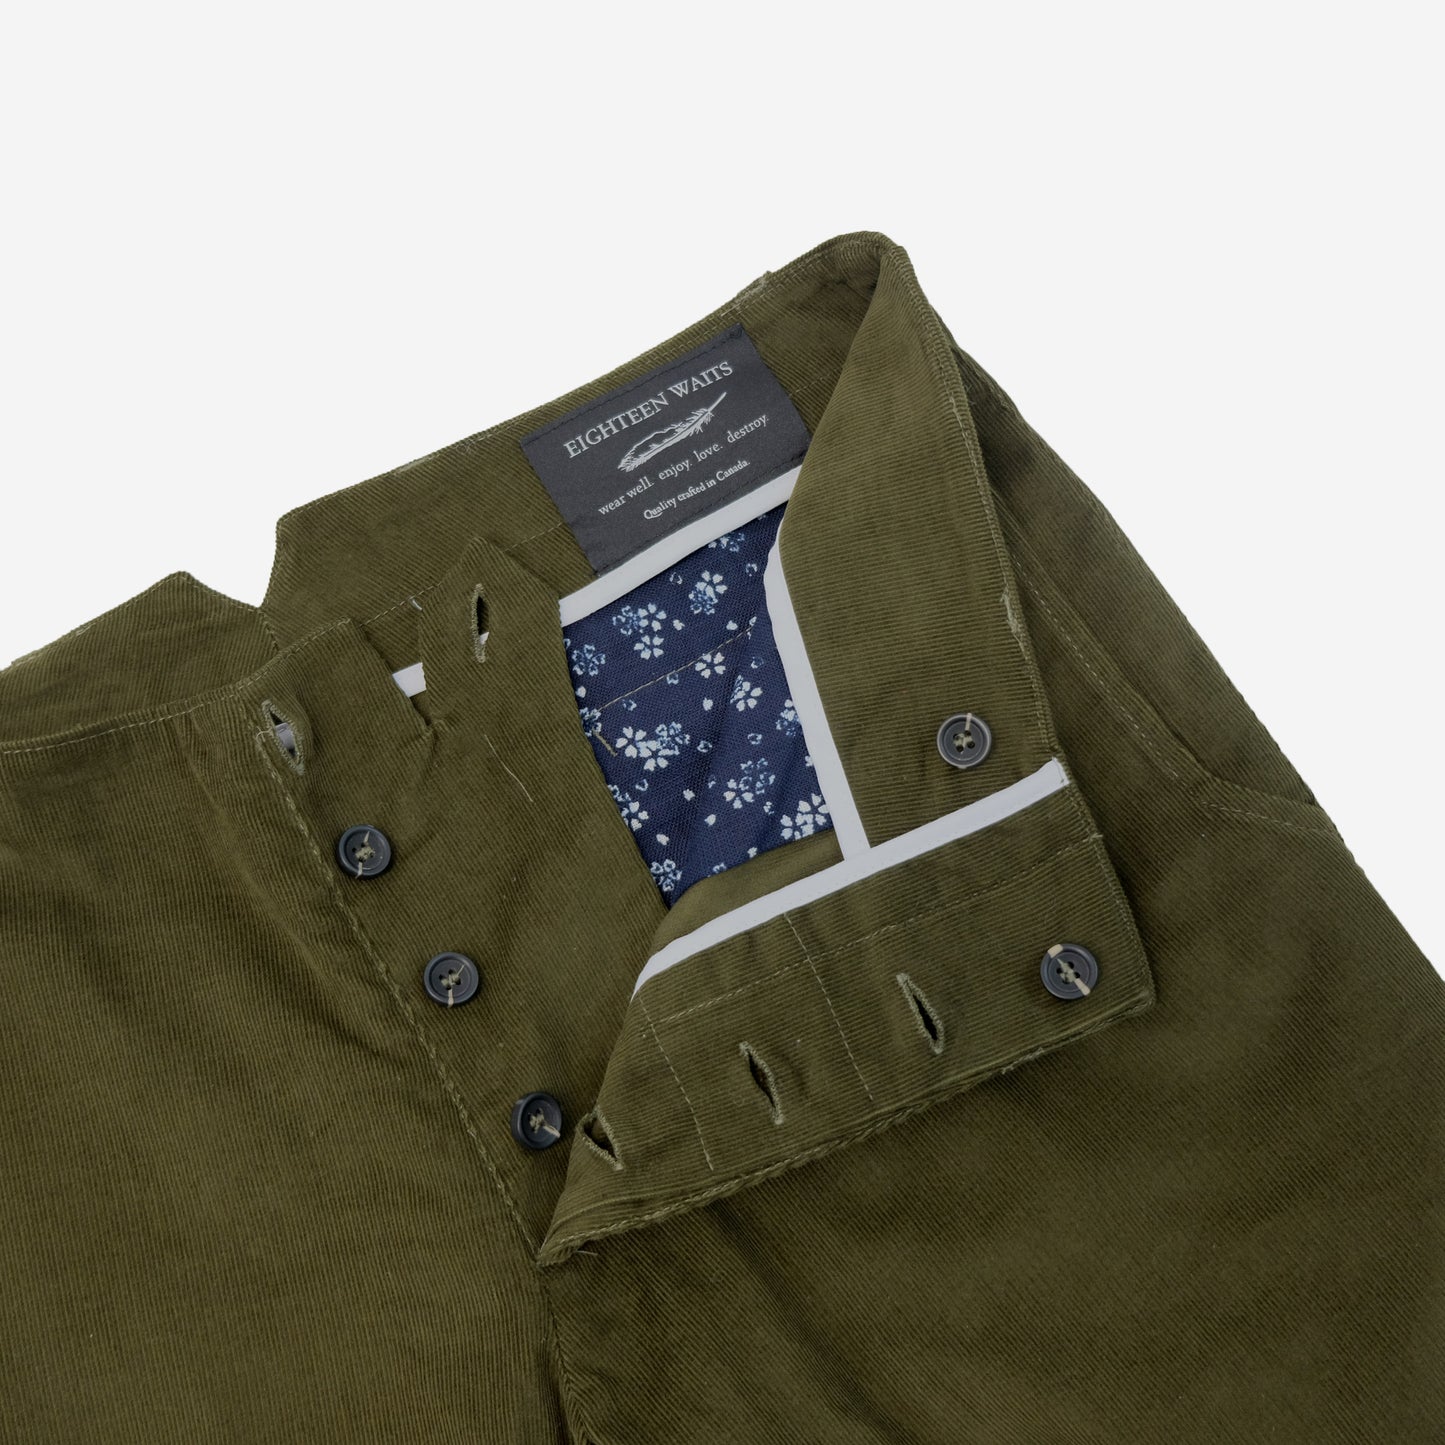 18 Waits - The Slims Trouser - Olive Green Corduroy (MG Exclusive)